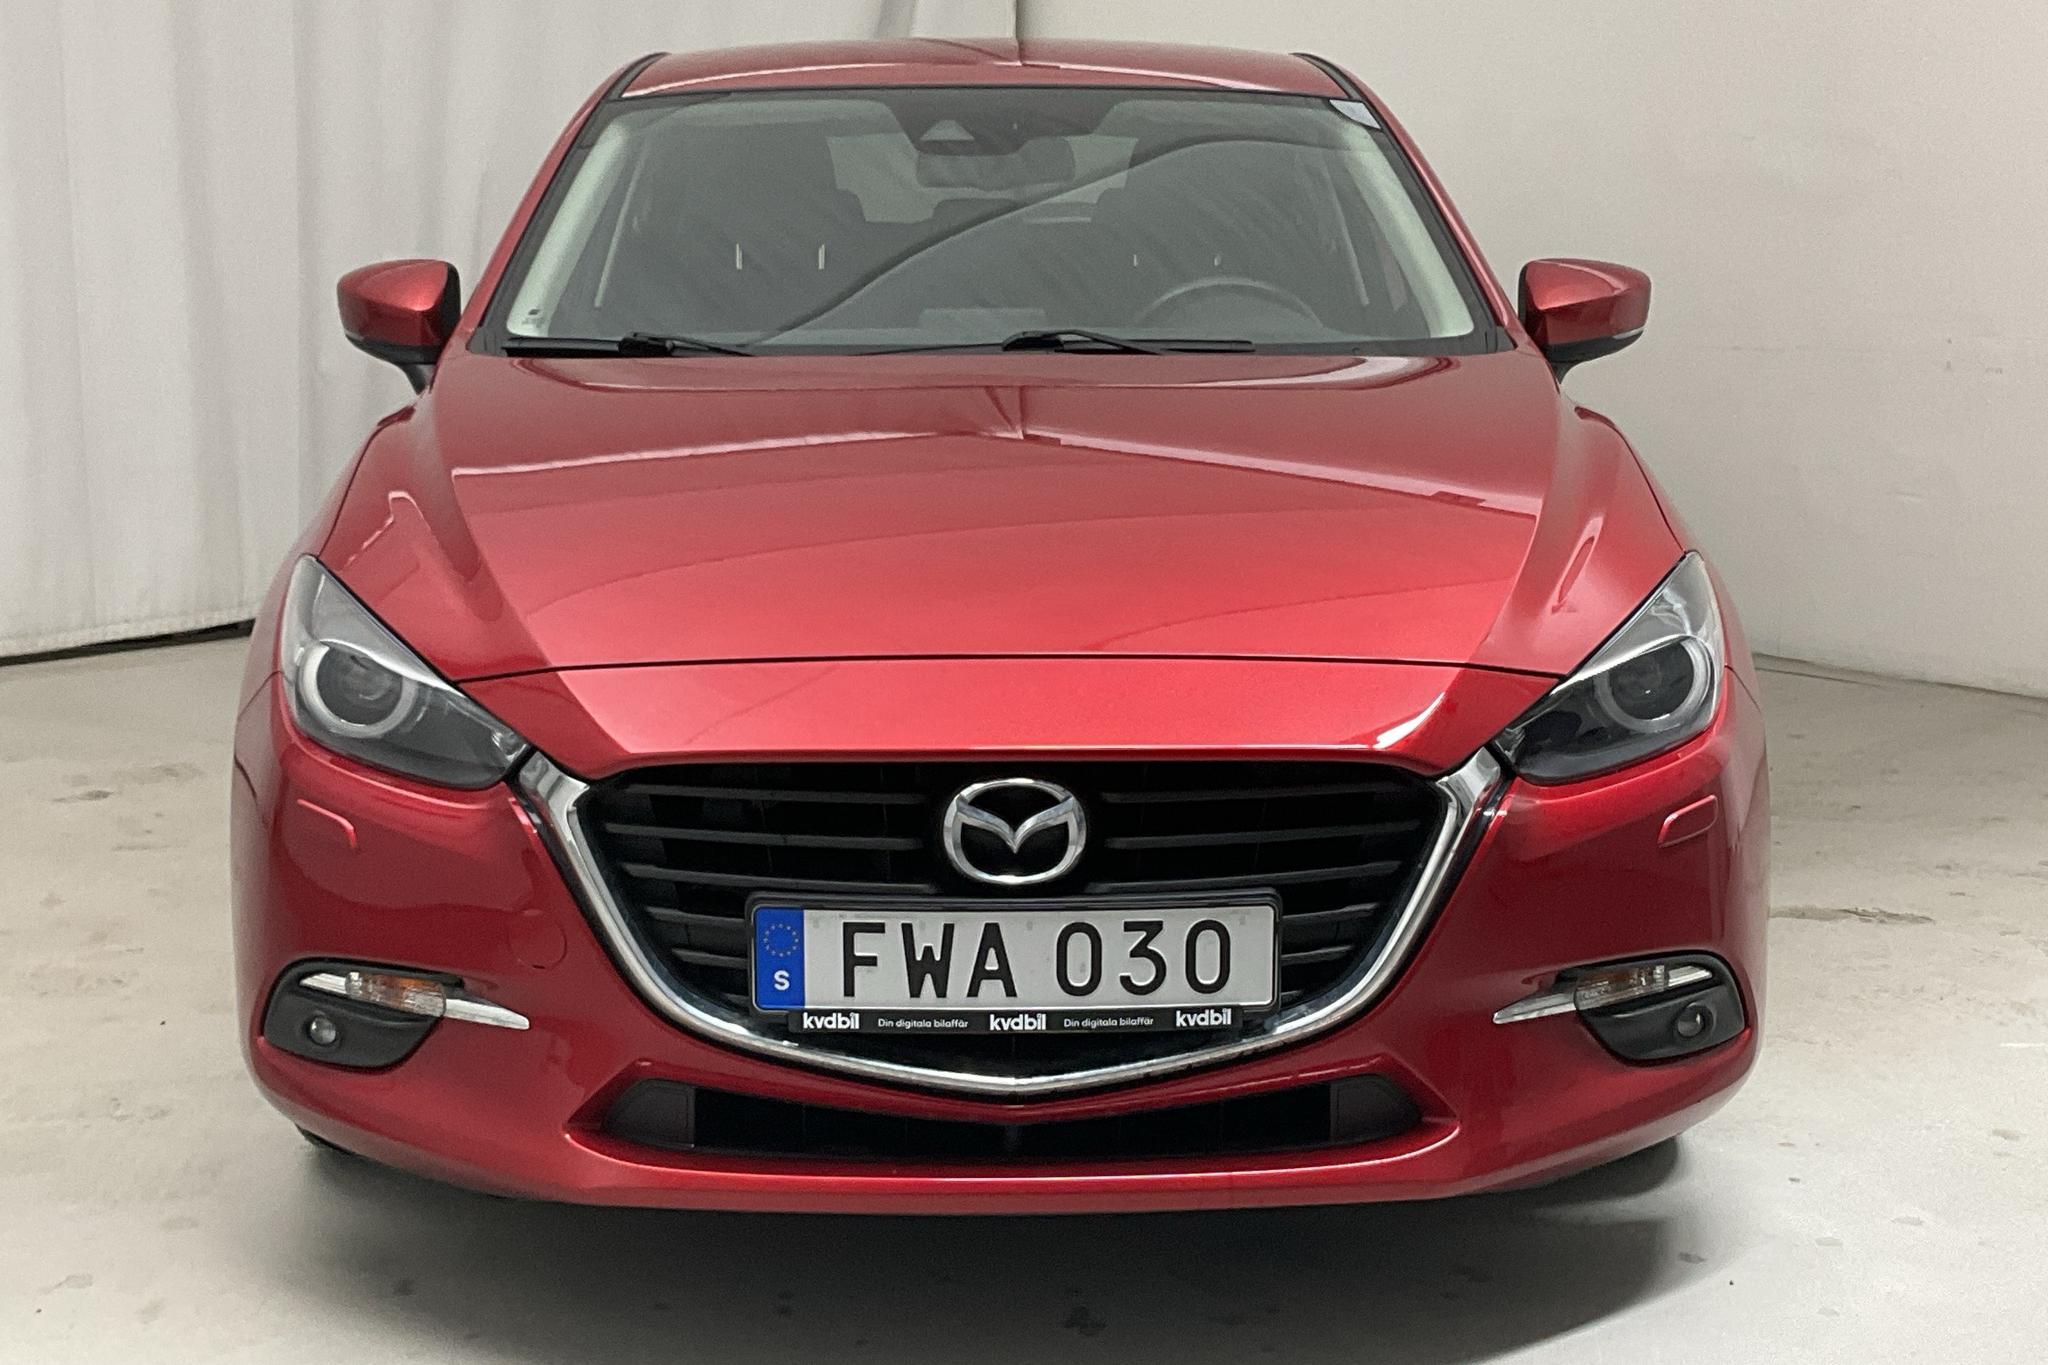 Mazda 3 2.0 5dr (120hk) - 69 820 km - Automatic - red - 2018